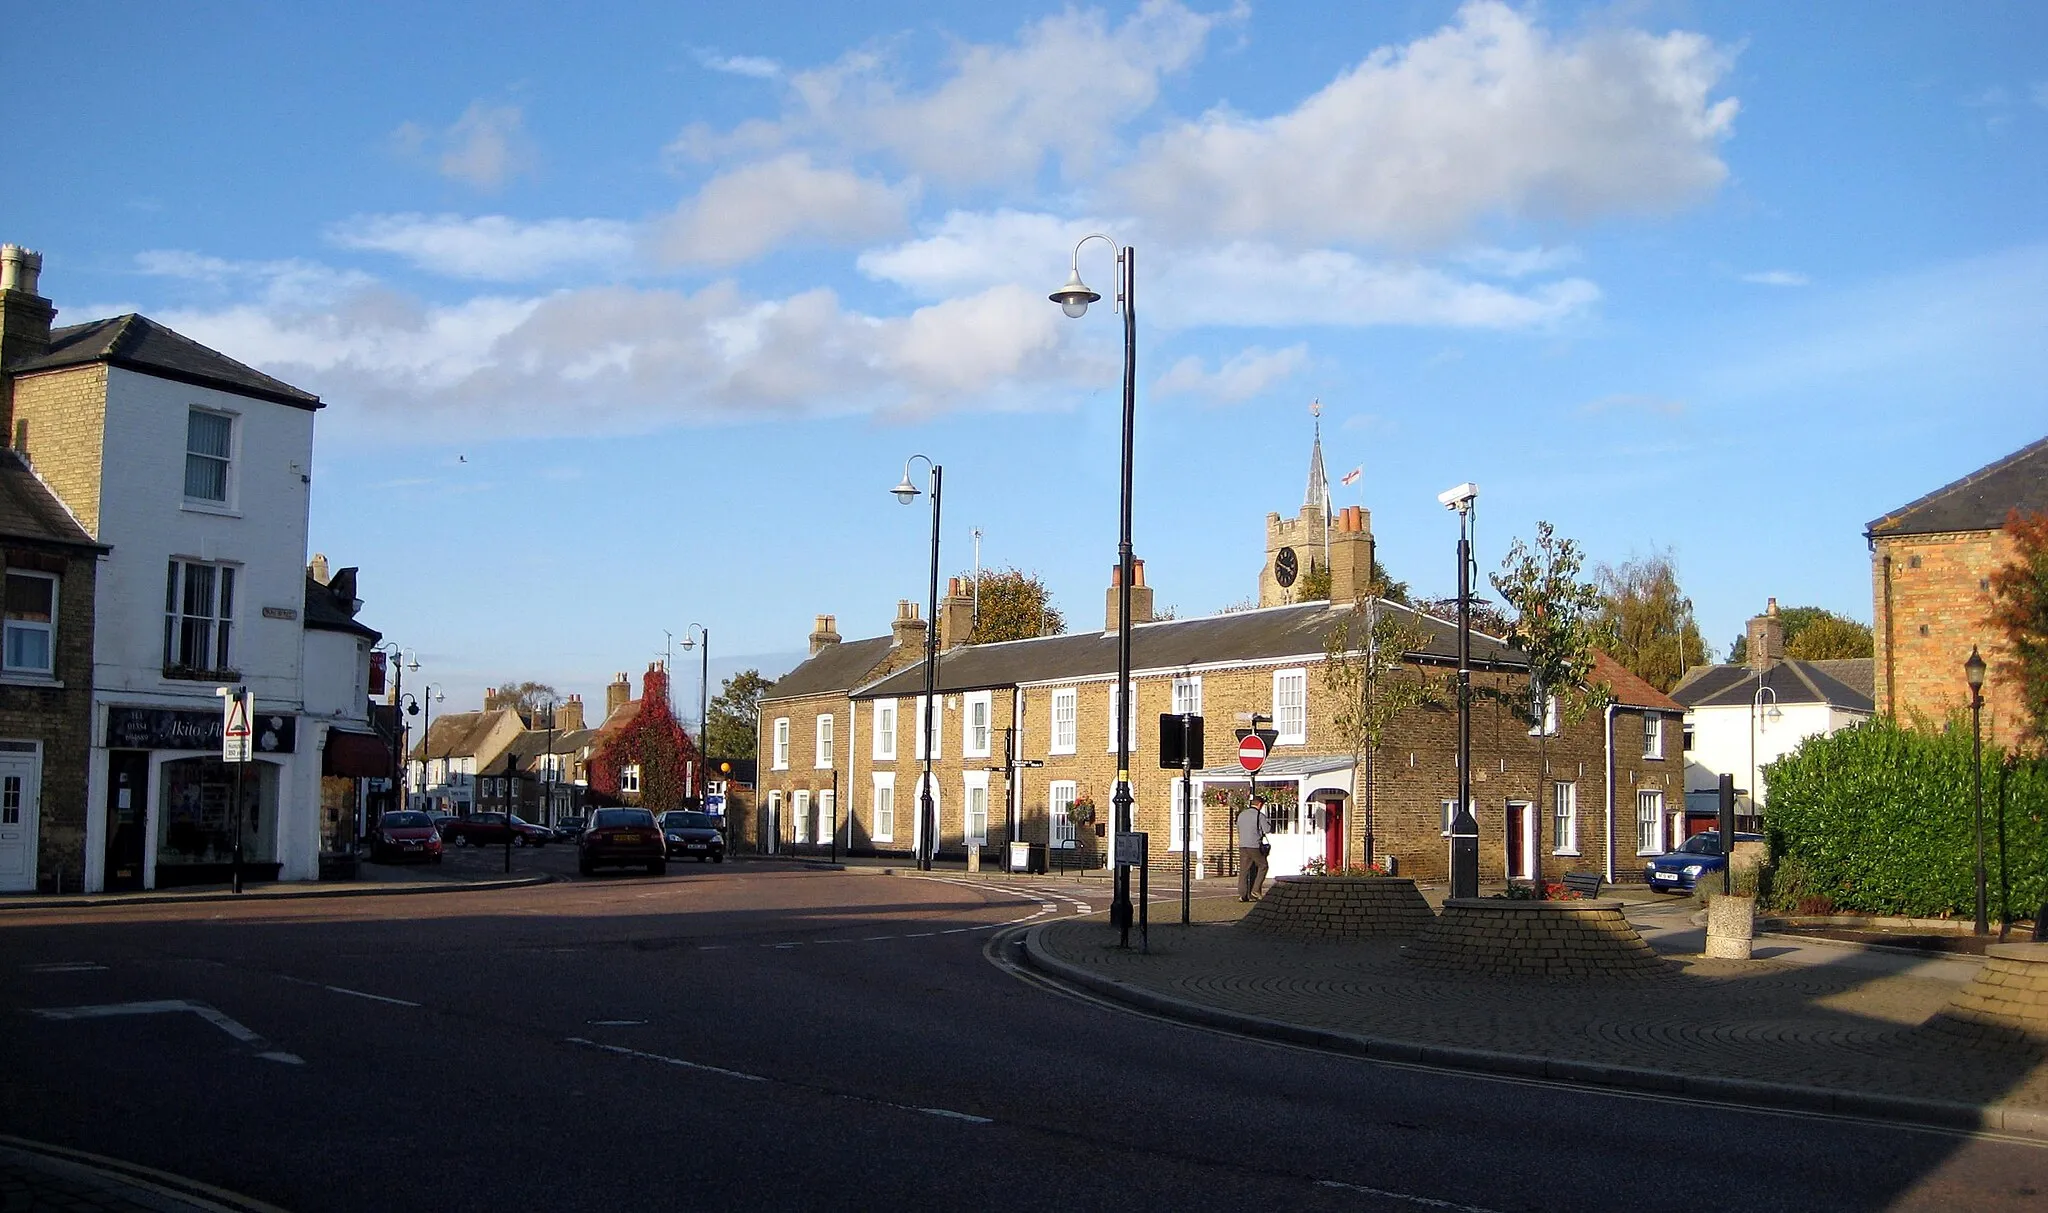 Photo showing: Market Hill, Chatteris, Cambridgeshire looking towards the High Street.